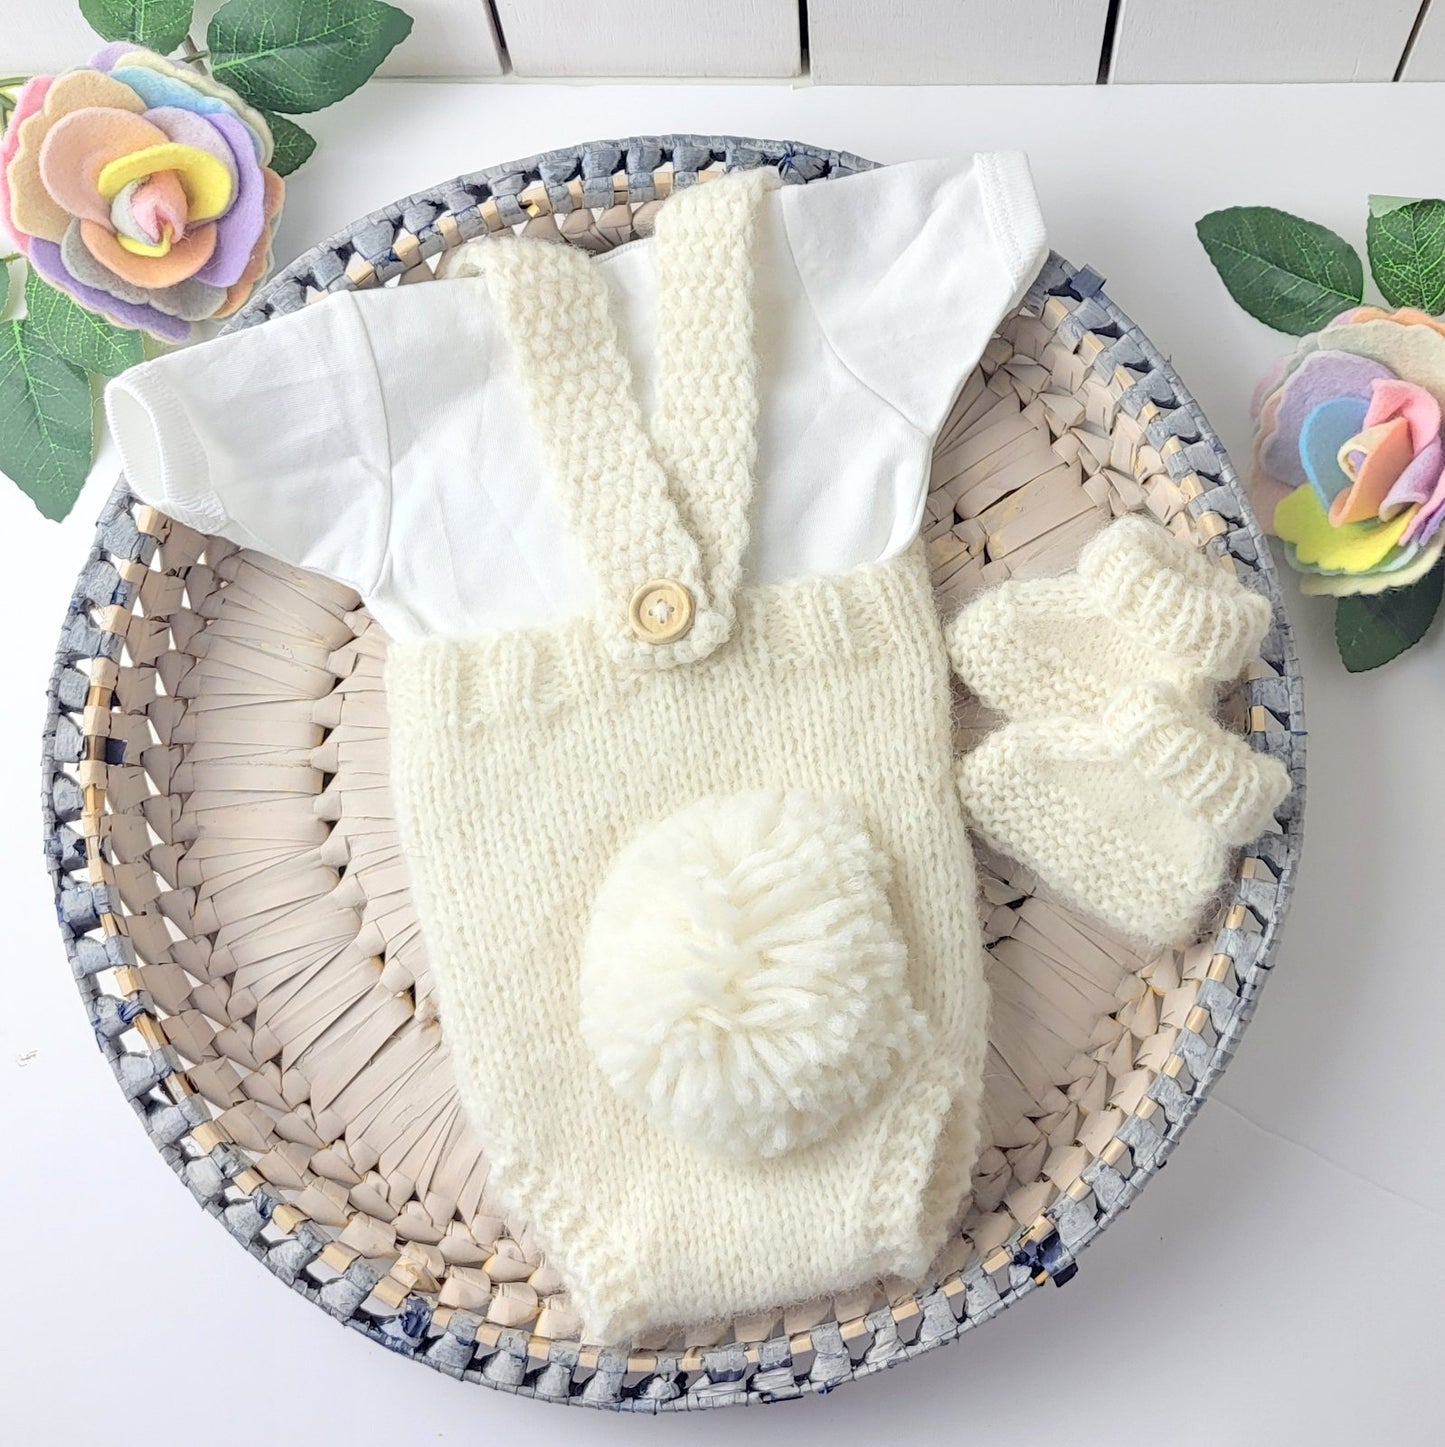 pom pom tail on the cream knitted baby romper with matching booties